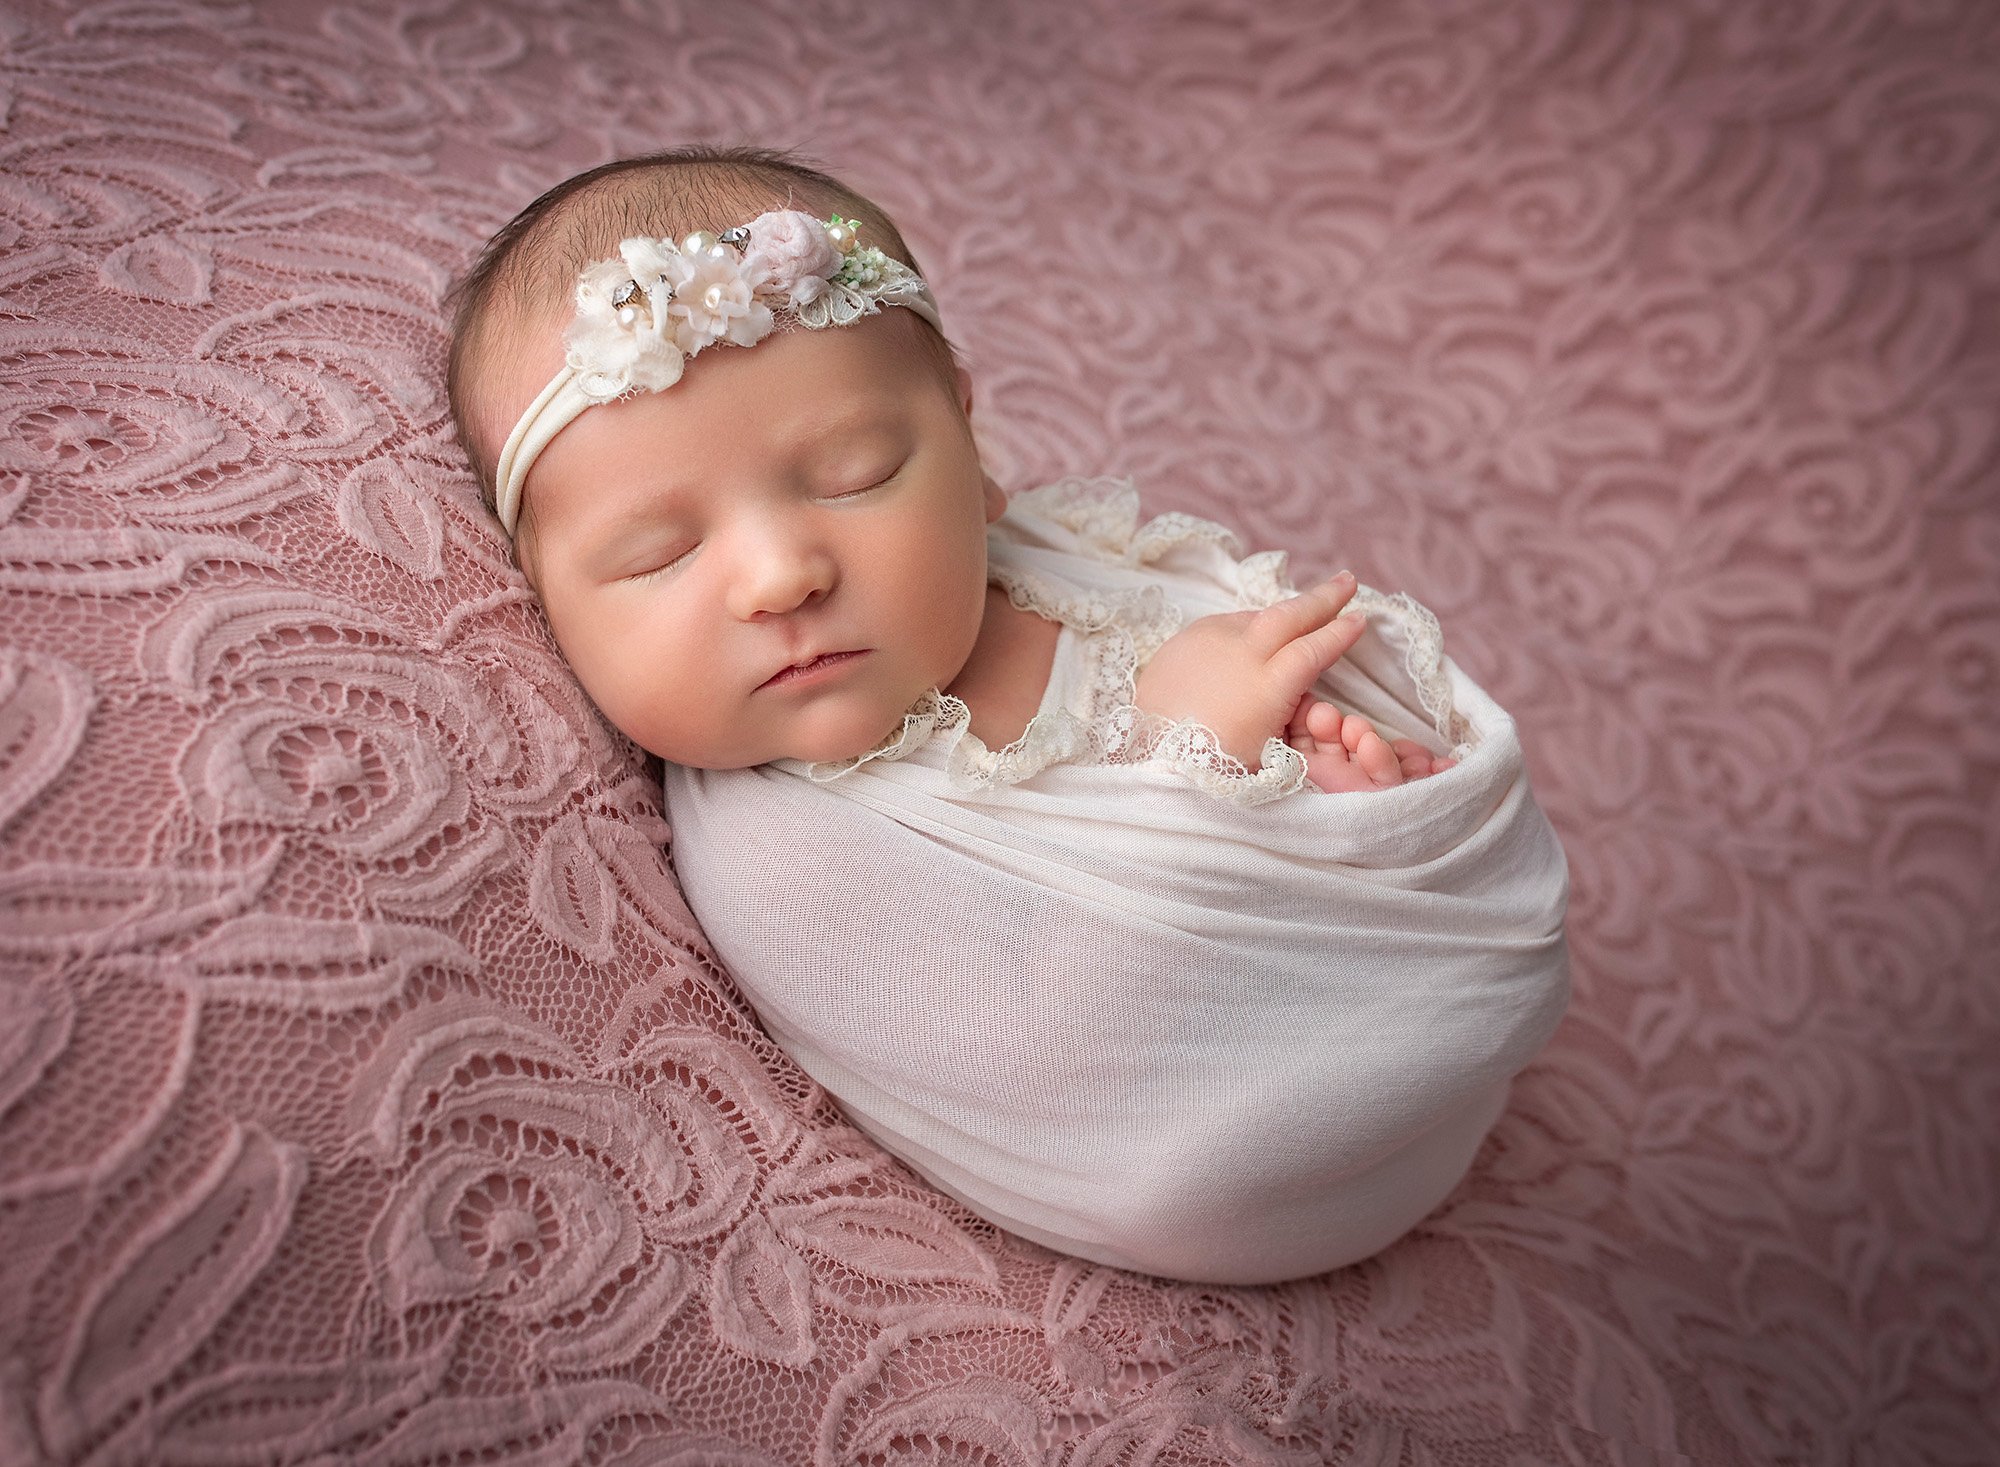 newborn baby girl swaddled in lace white wrap asleep on laced pink background